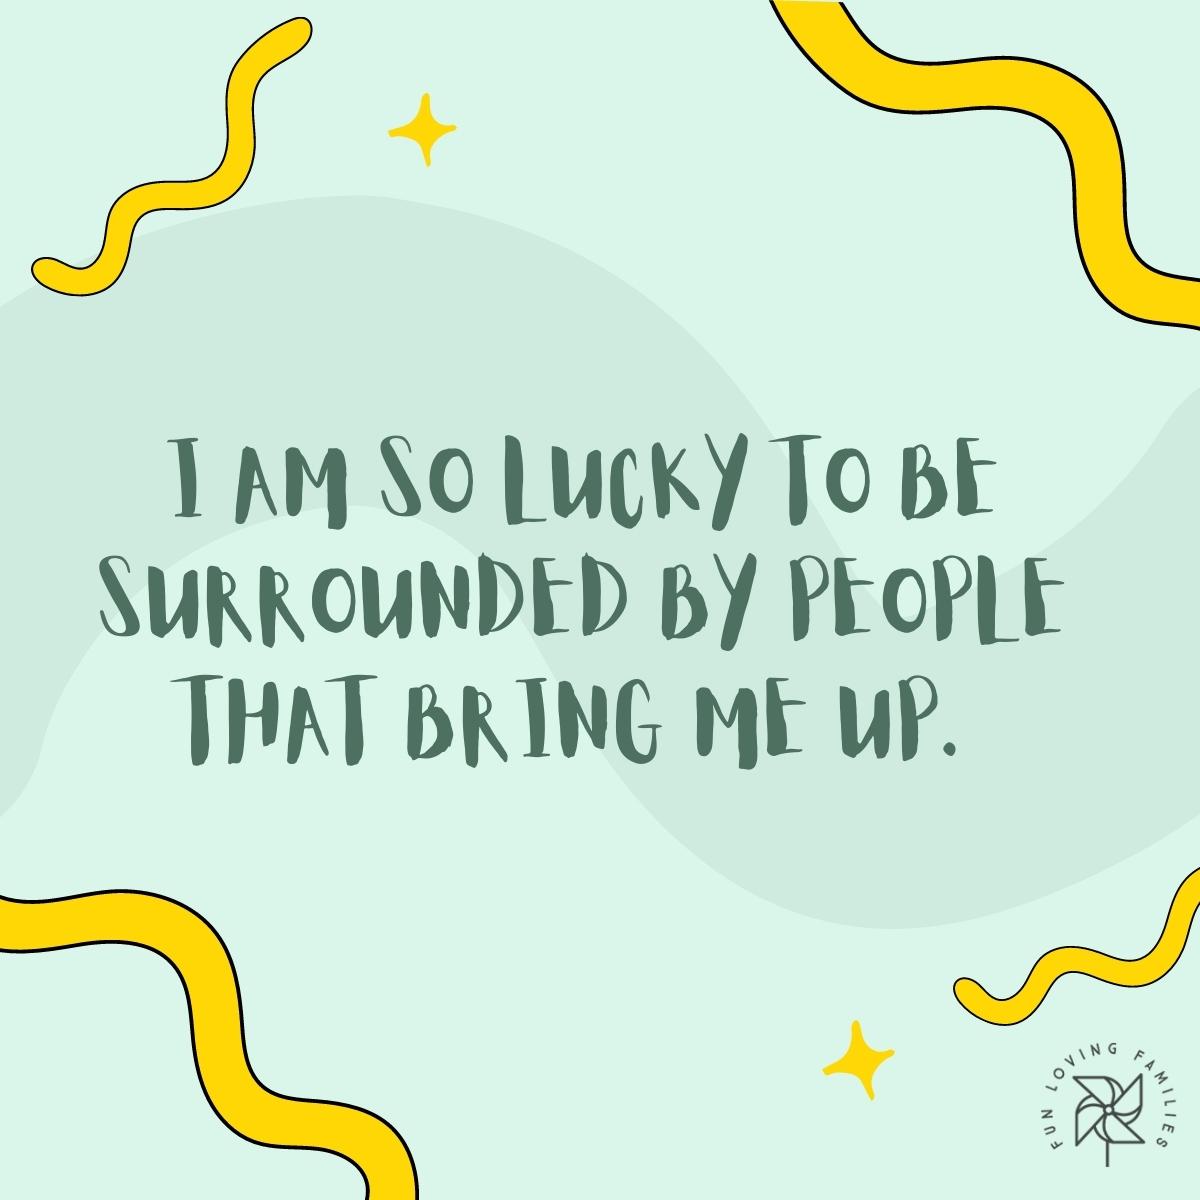 I am so lucky to be surrounded by people that bring me up affirmation